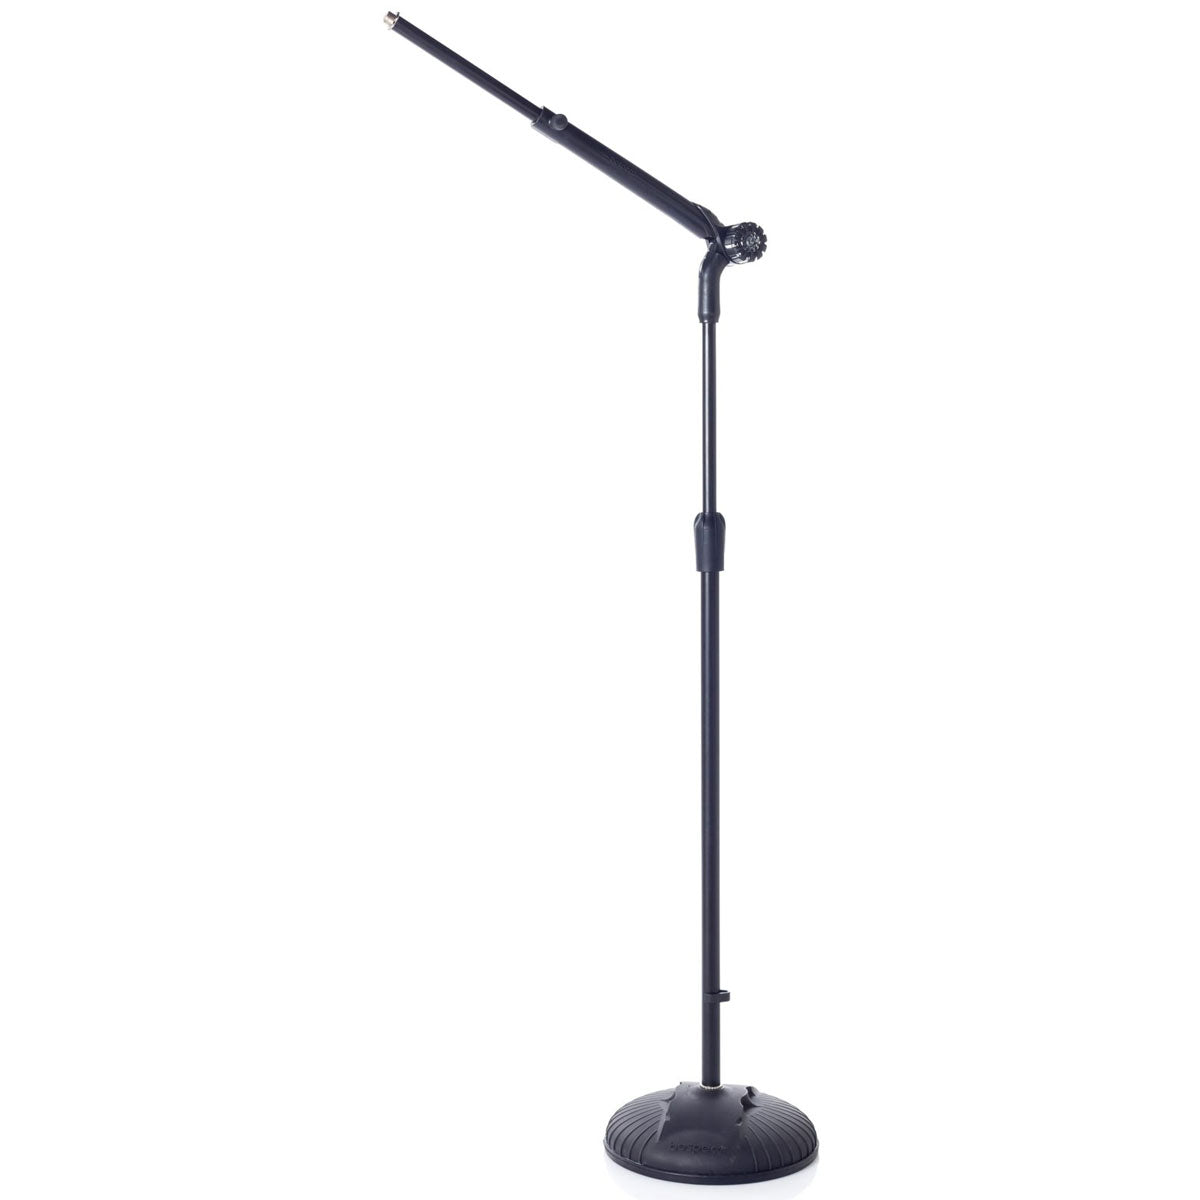 Bespeco MS16 Revolutionary 2 in 1 Straight and Telescopic Boom Microphone Stand